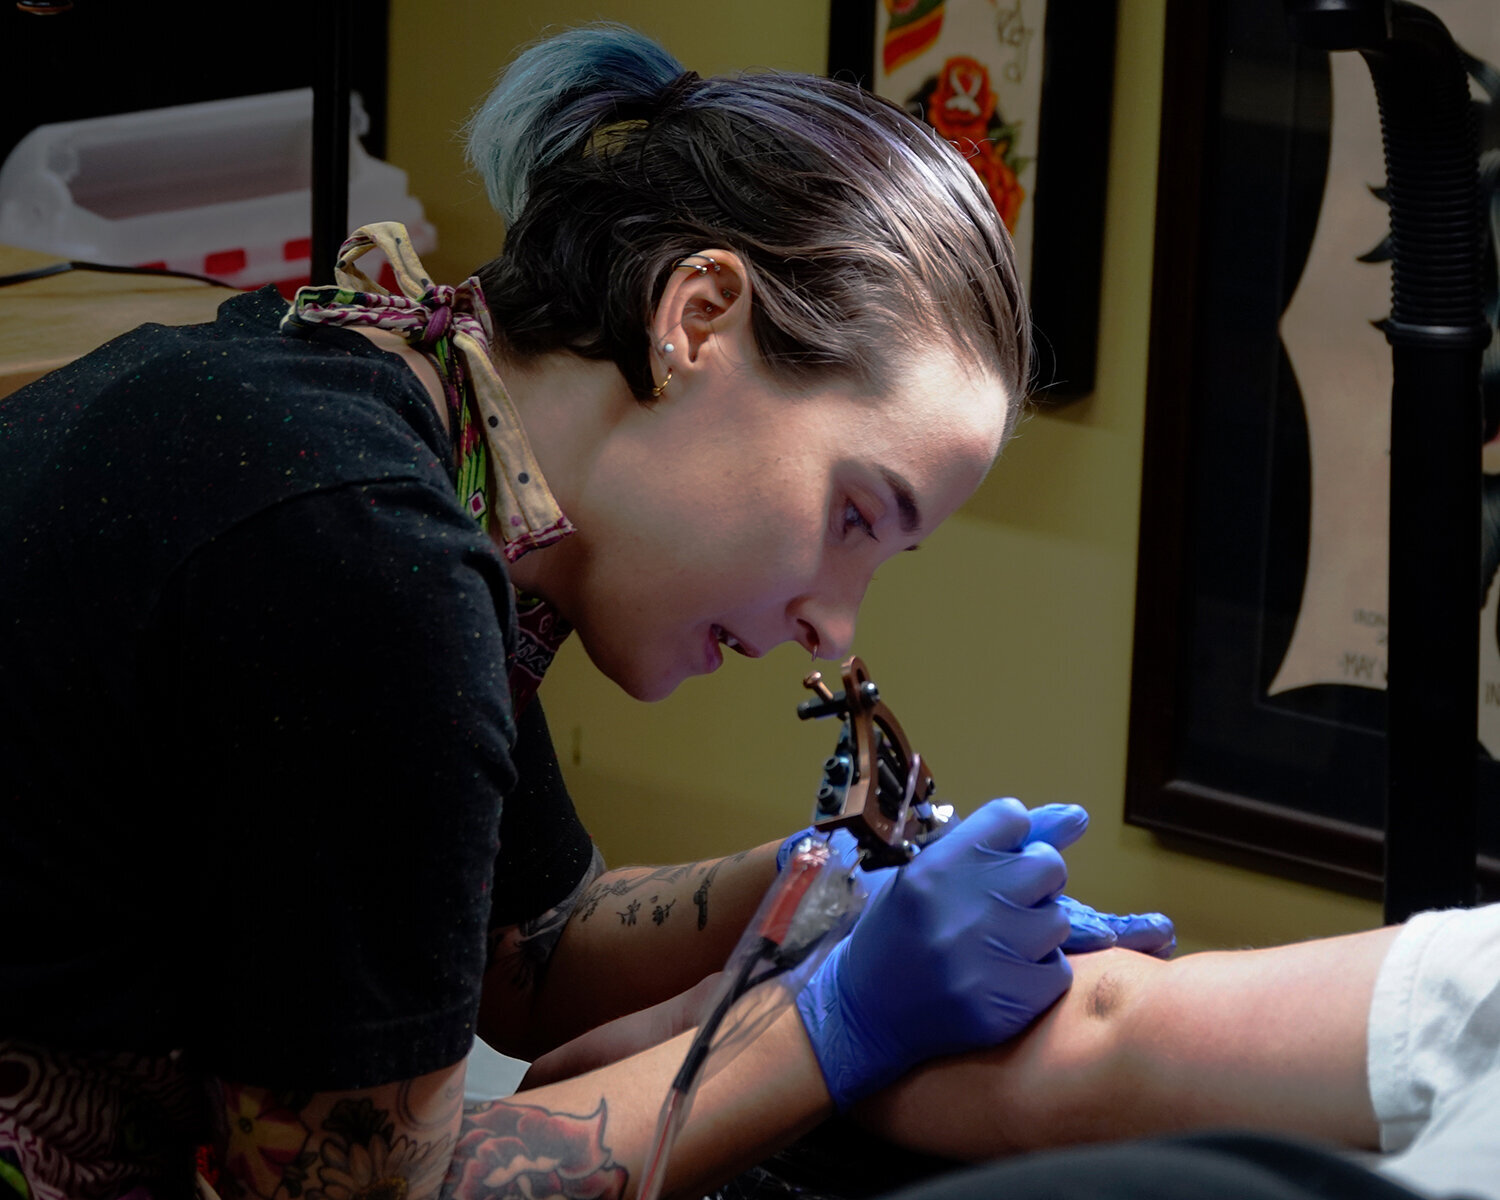 York Maine is Getting its FirstEver Tattoo Studio